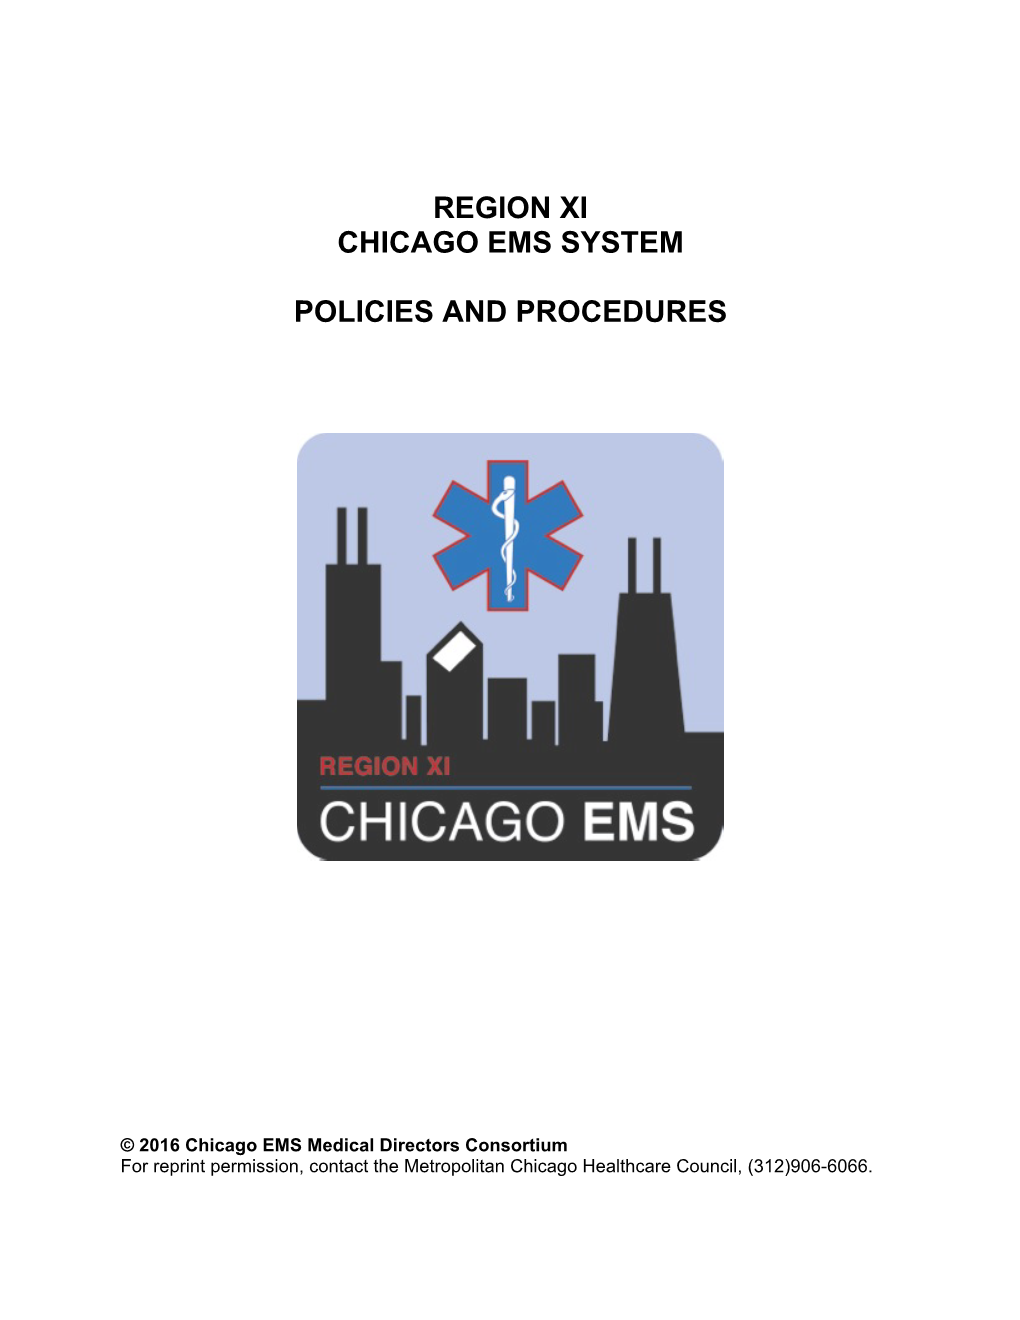 Region Xi Chicago Ems System Policies and Procedures